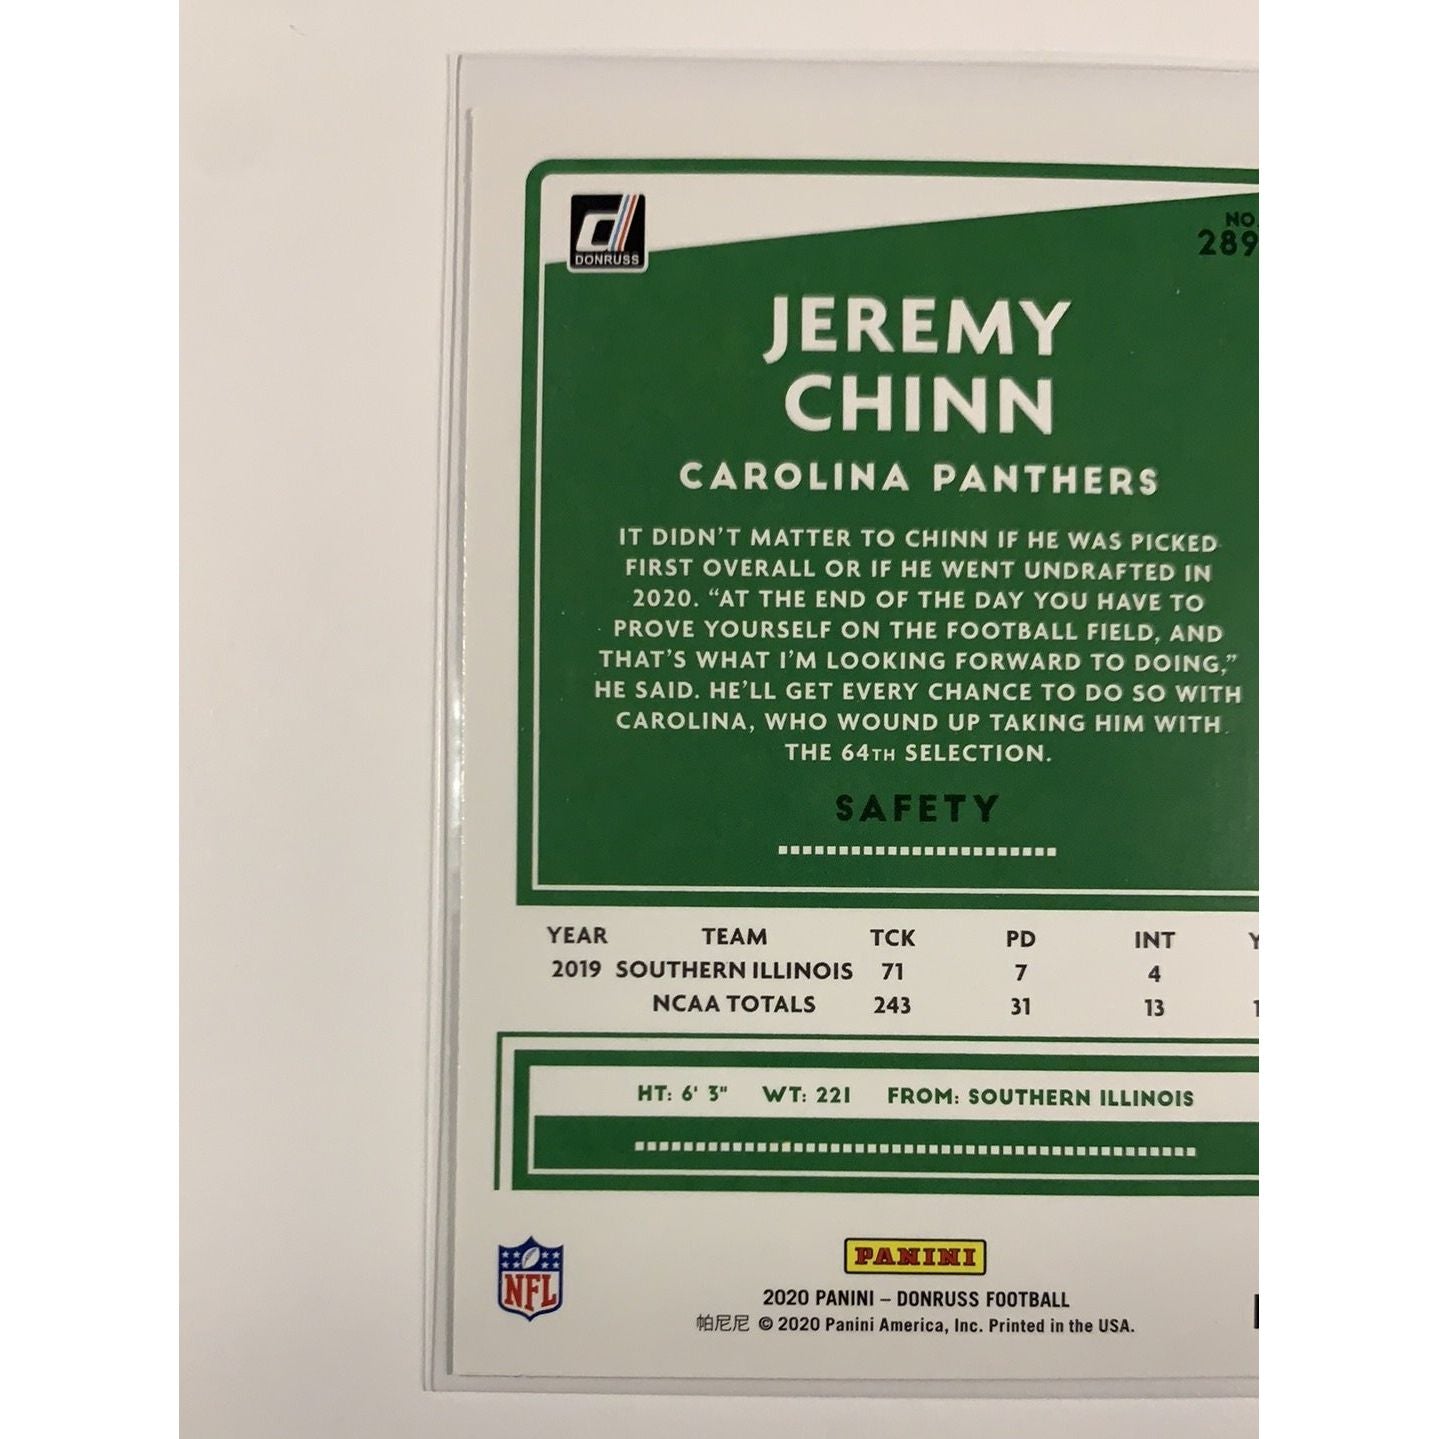  2020 Donruss Jeremy Chinn RC  Local Legends Cards & Collectibles